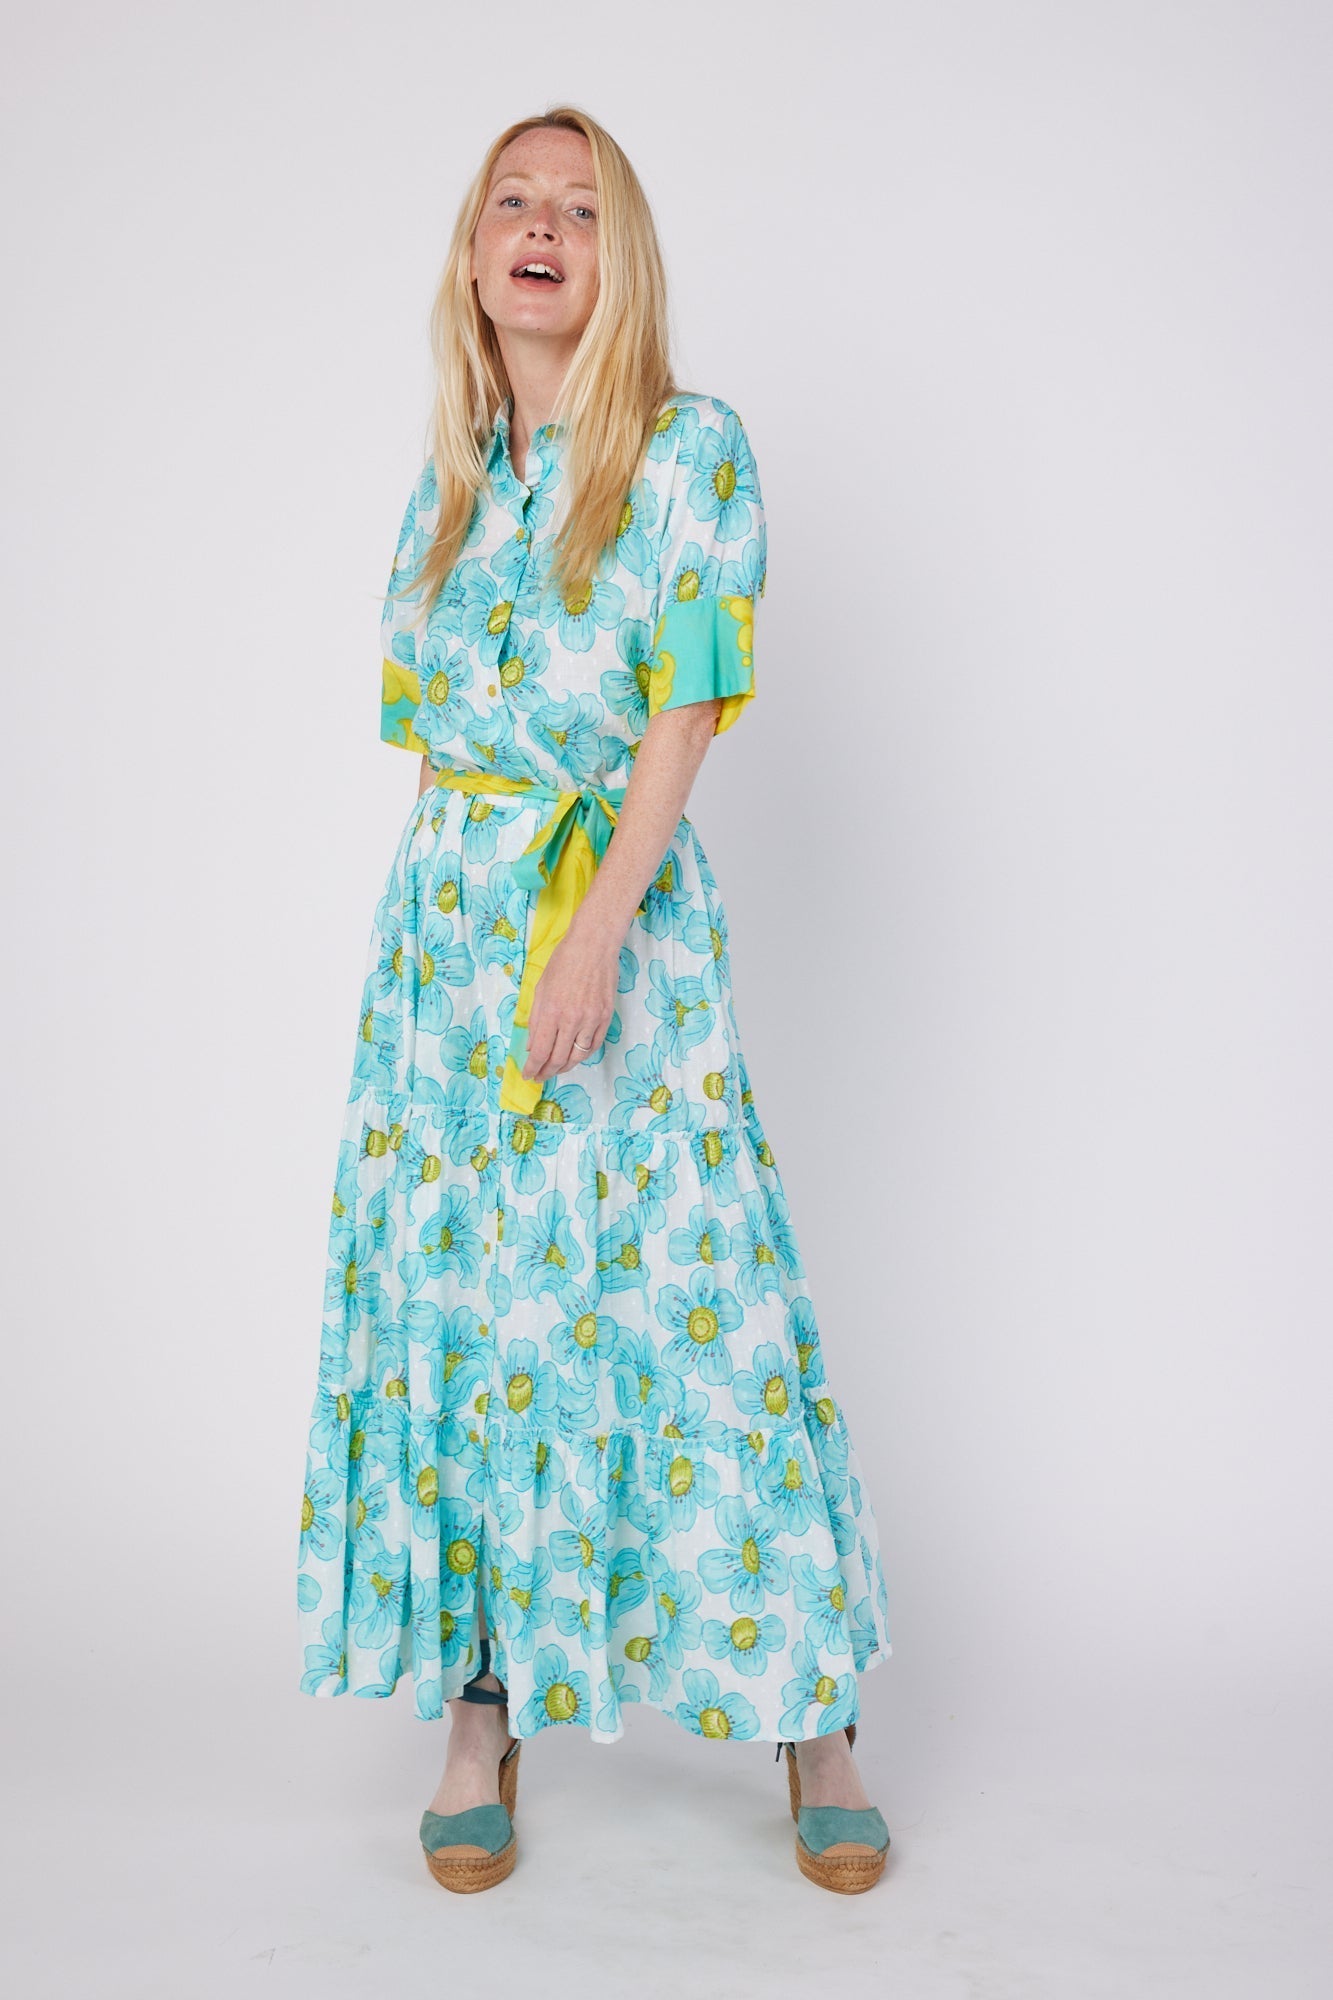 ModaPosa Alcee Short Puff Sleeve Maxi Dress with Collar and Detachable Belt in Blue Floral . Discover women's resort dresses and lifestyle clothing inspired by the Mediterranean. Free worldwide shipping available!